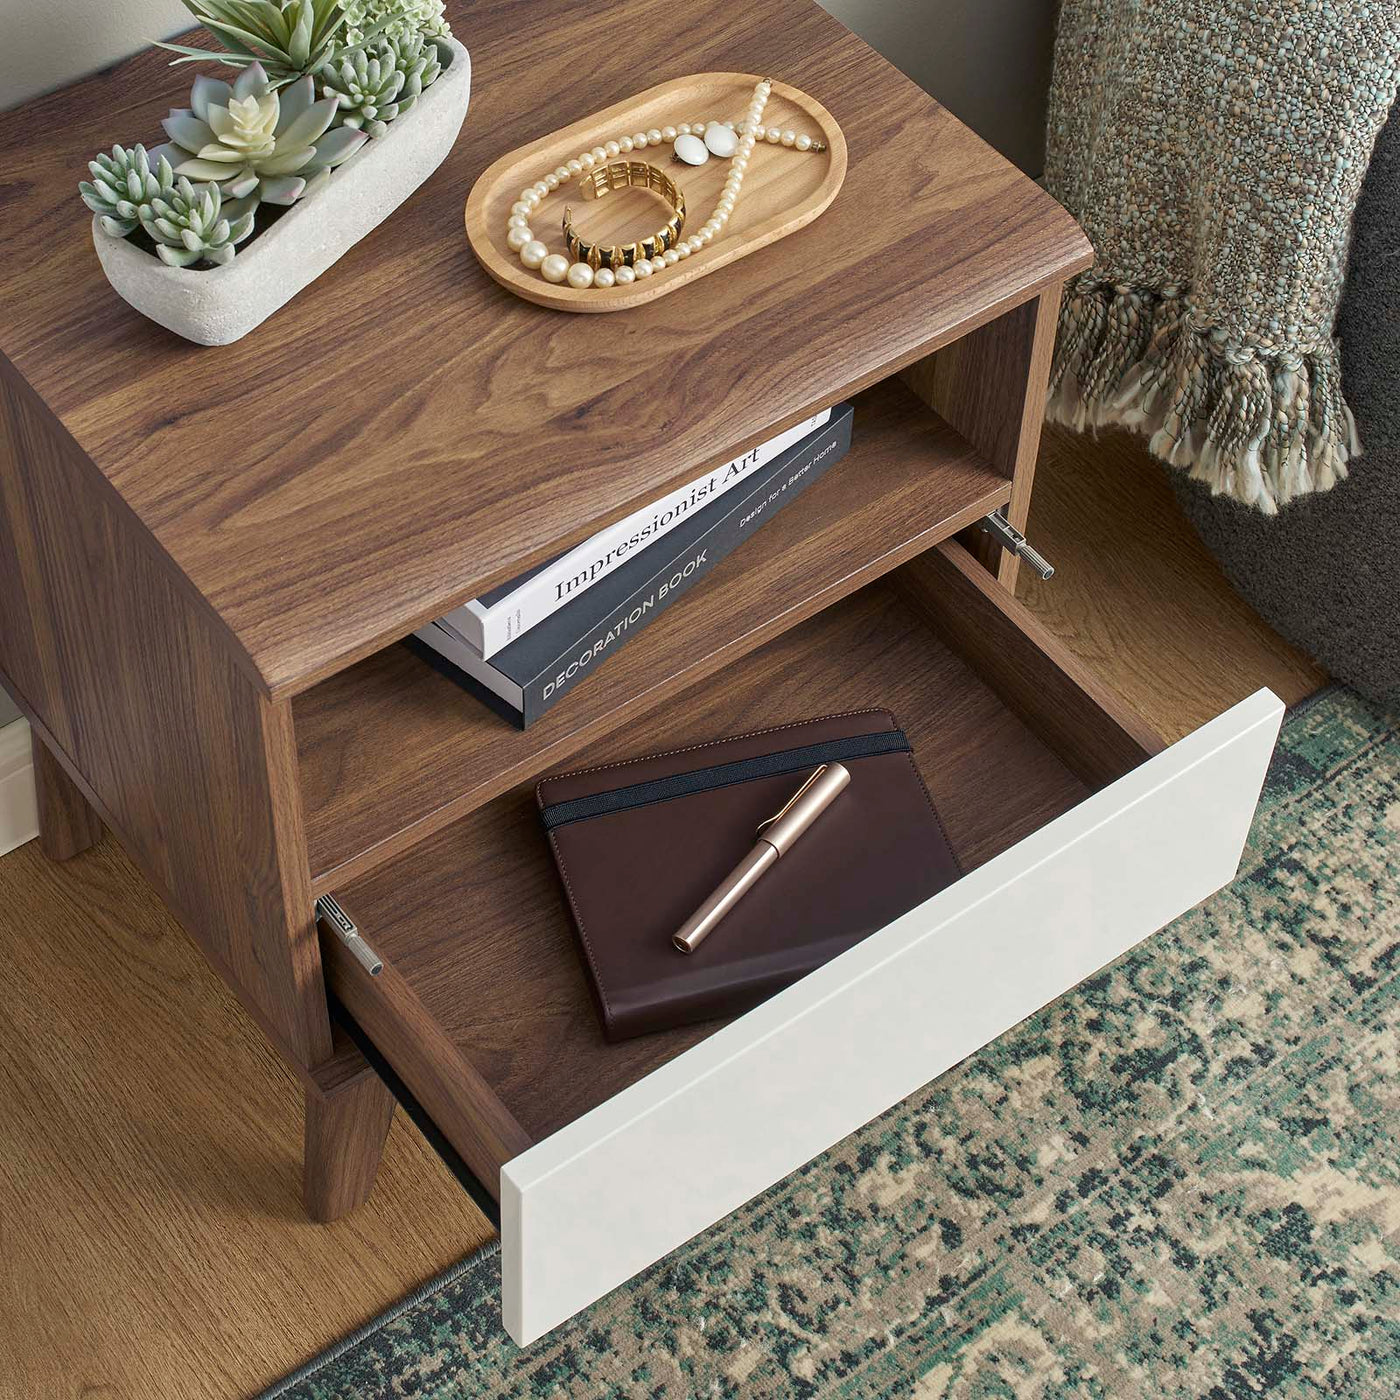 Envision Nightstand